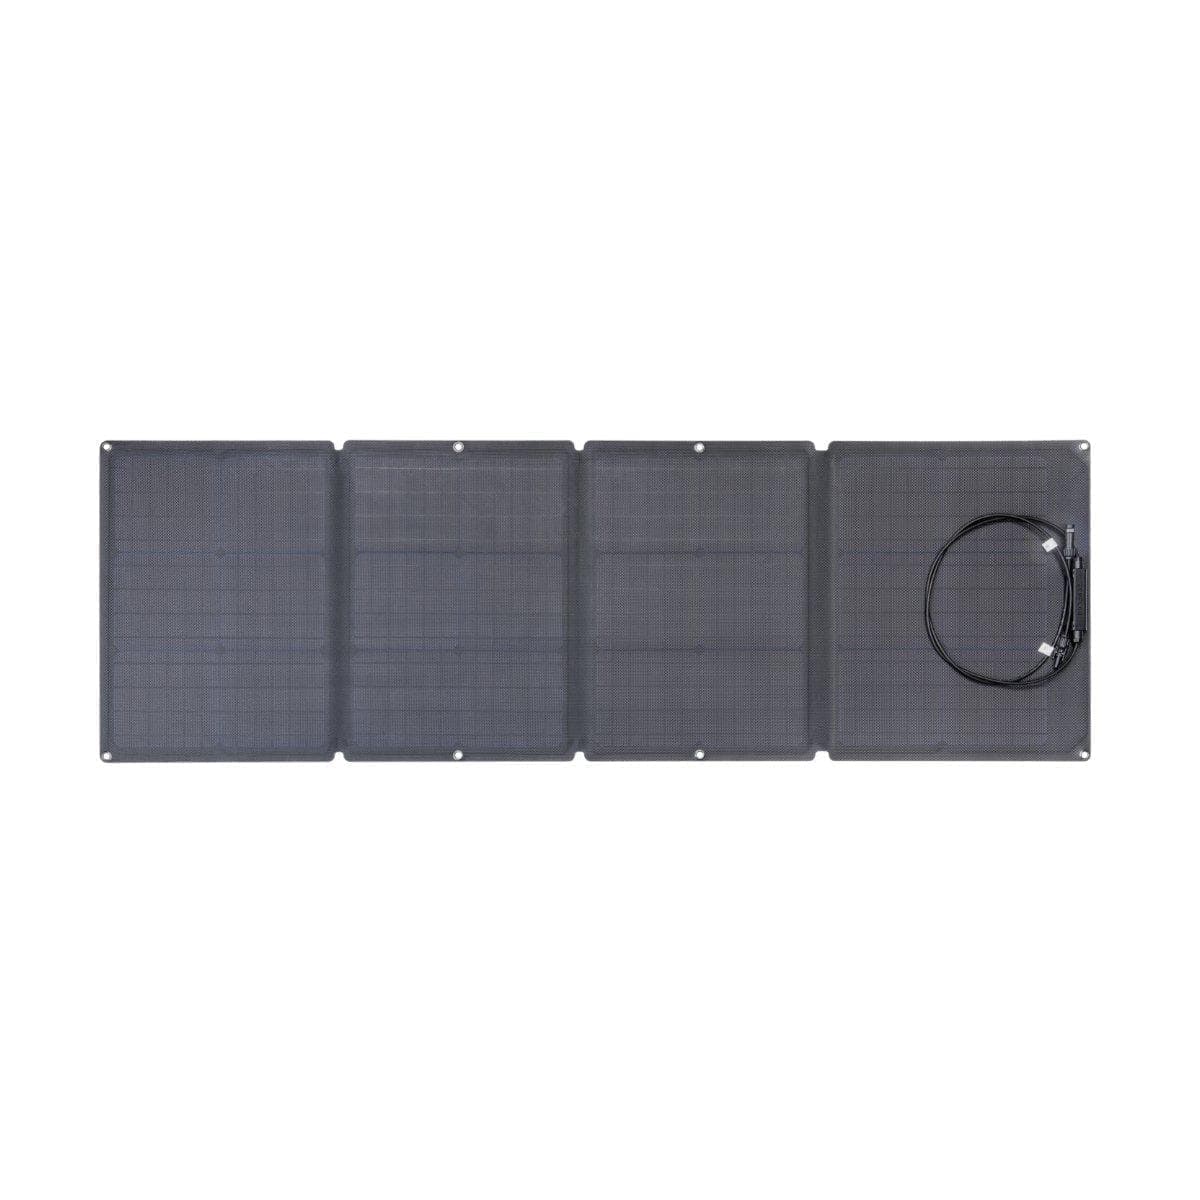 EcoFlow 110W Solar Panel (Recommended Accessory)